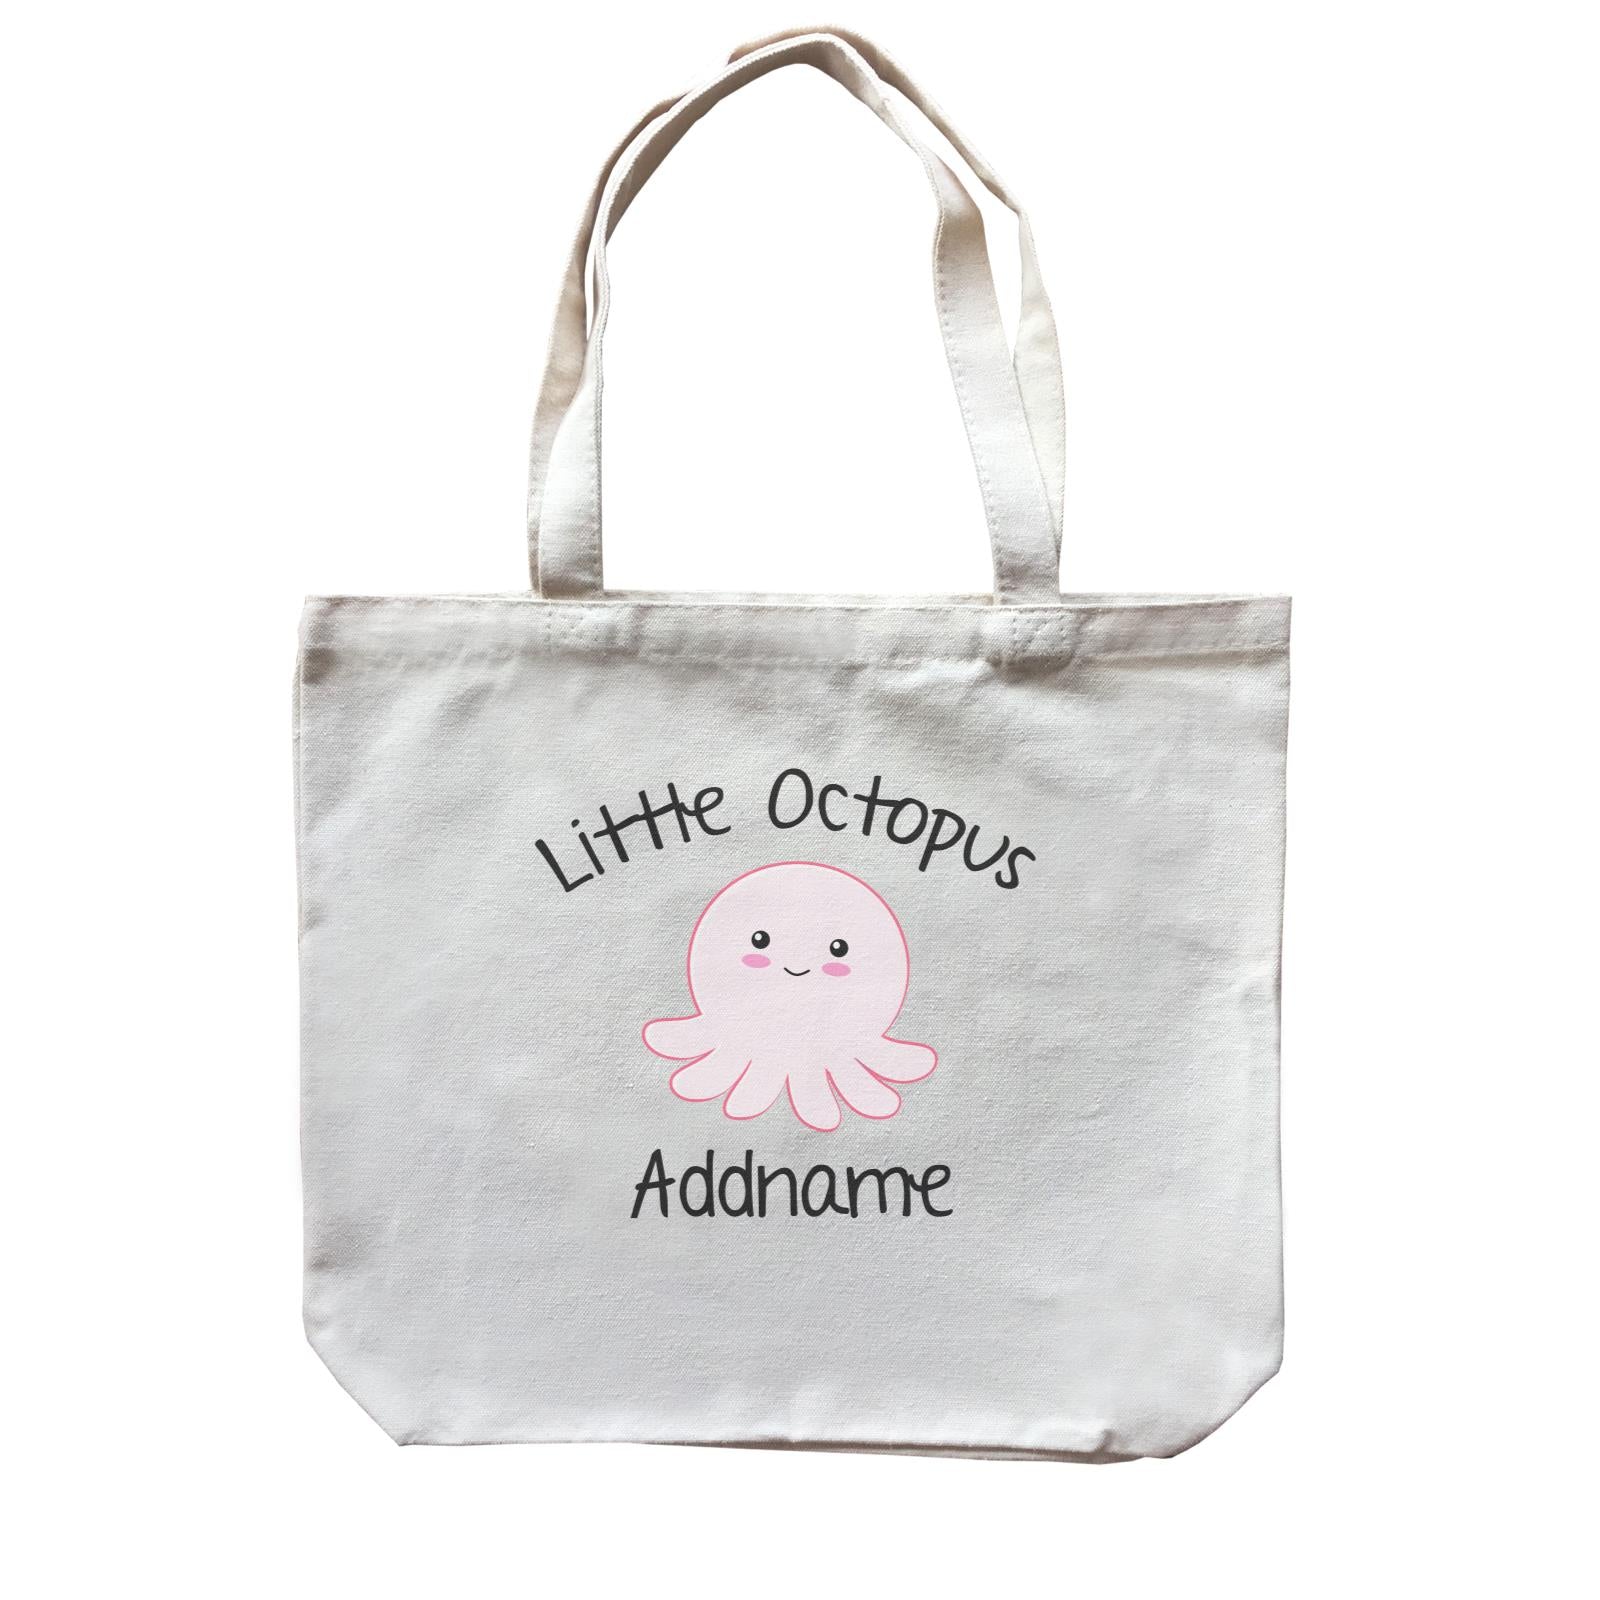 Cute Animals And Friends Series Little Octopus Boy Addname Canvas Bag